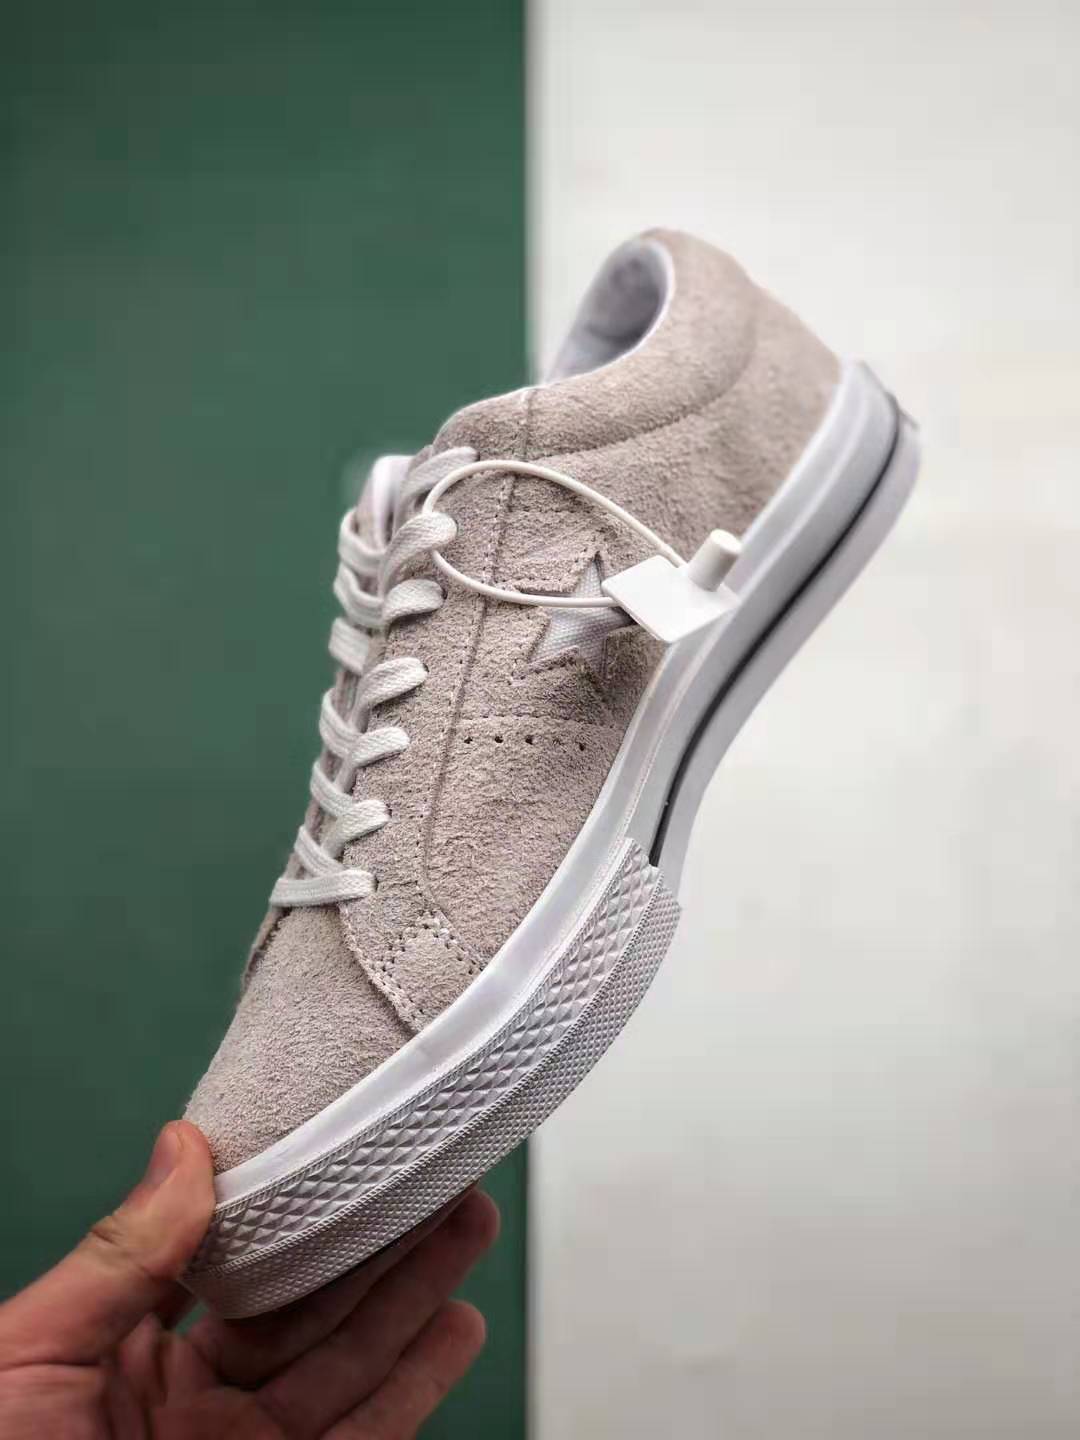 Converse One Star Low Vintage Suede 'White' 161577C - Shop Now for Classic Style